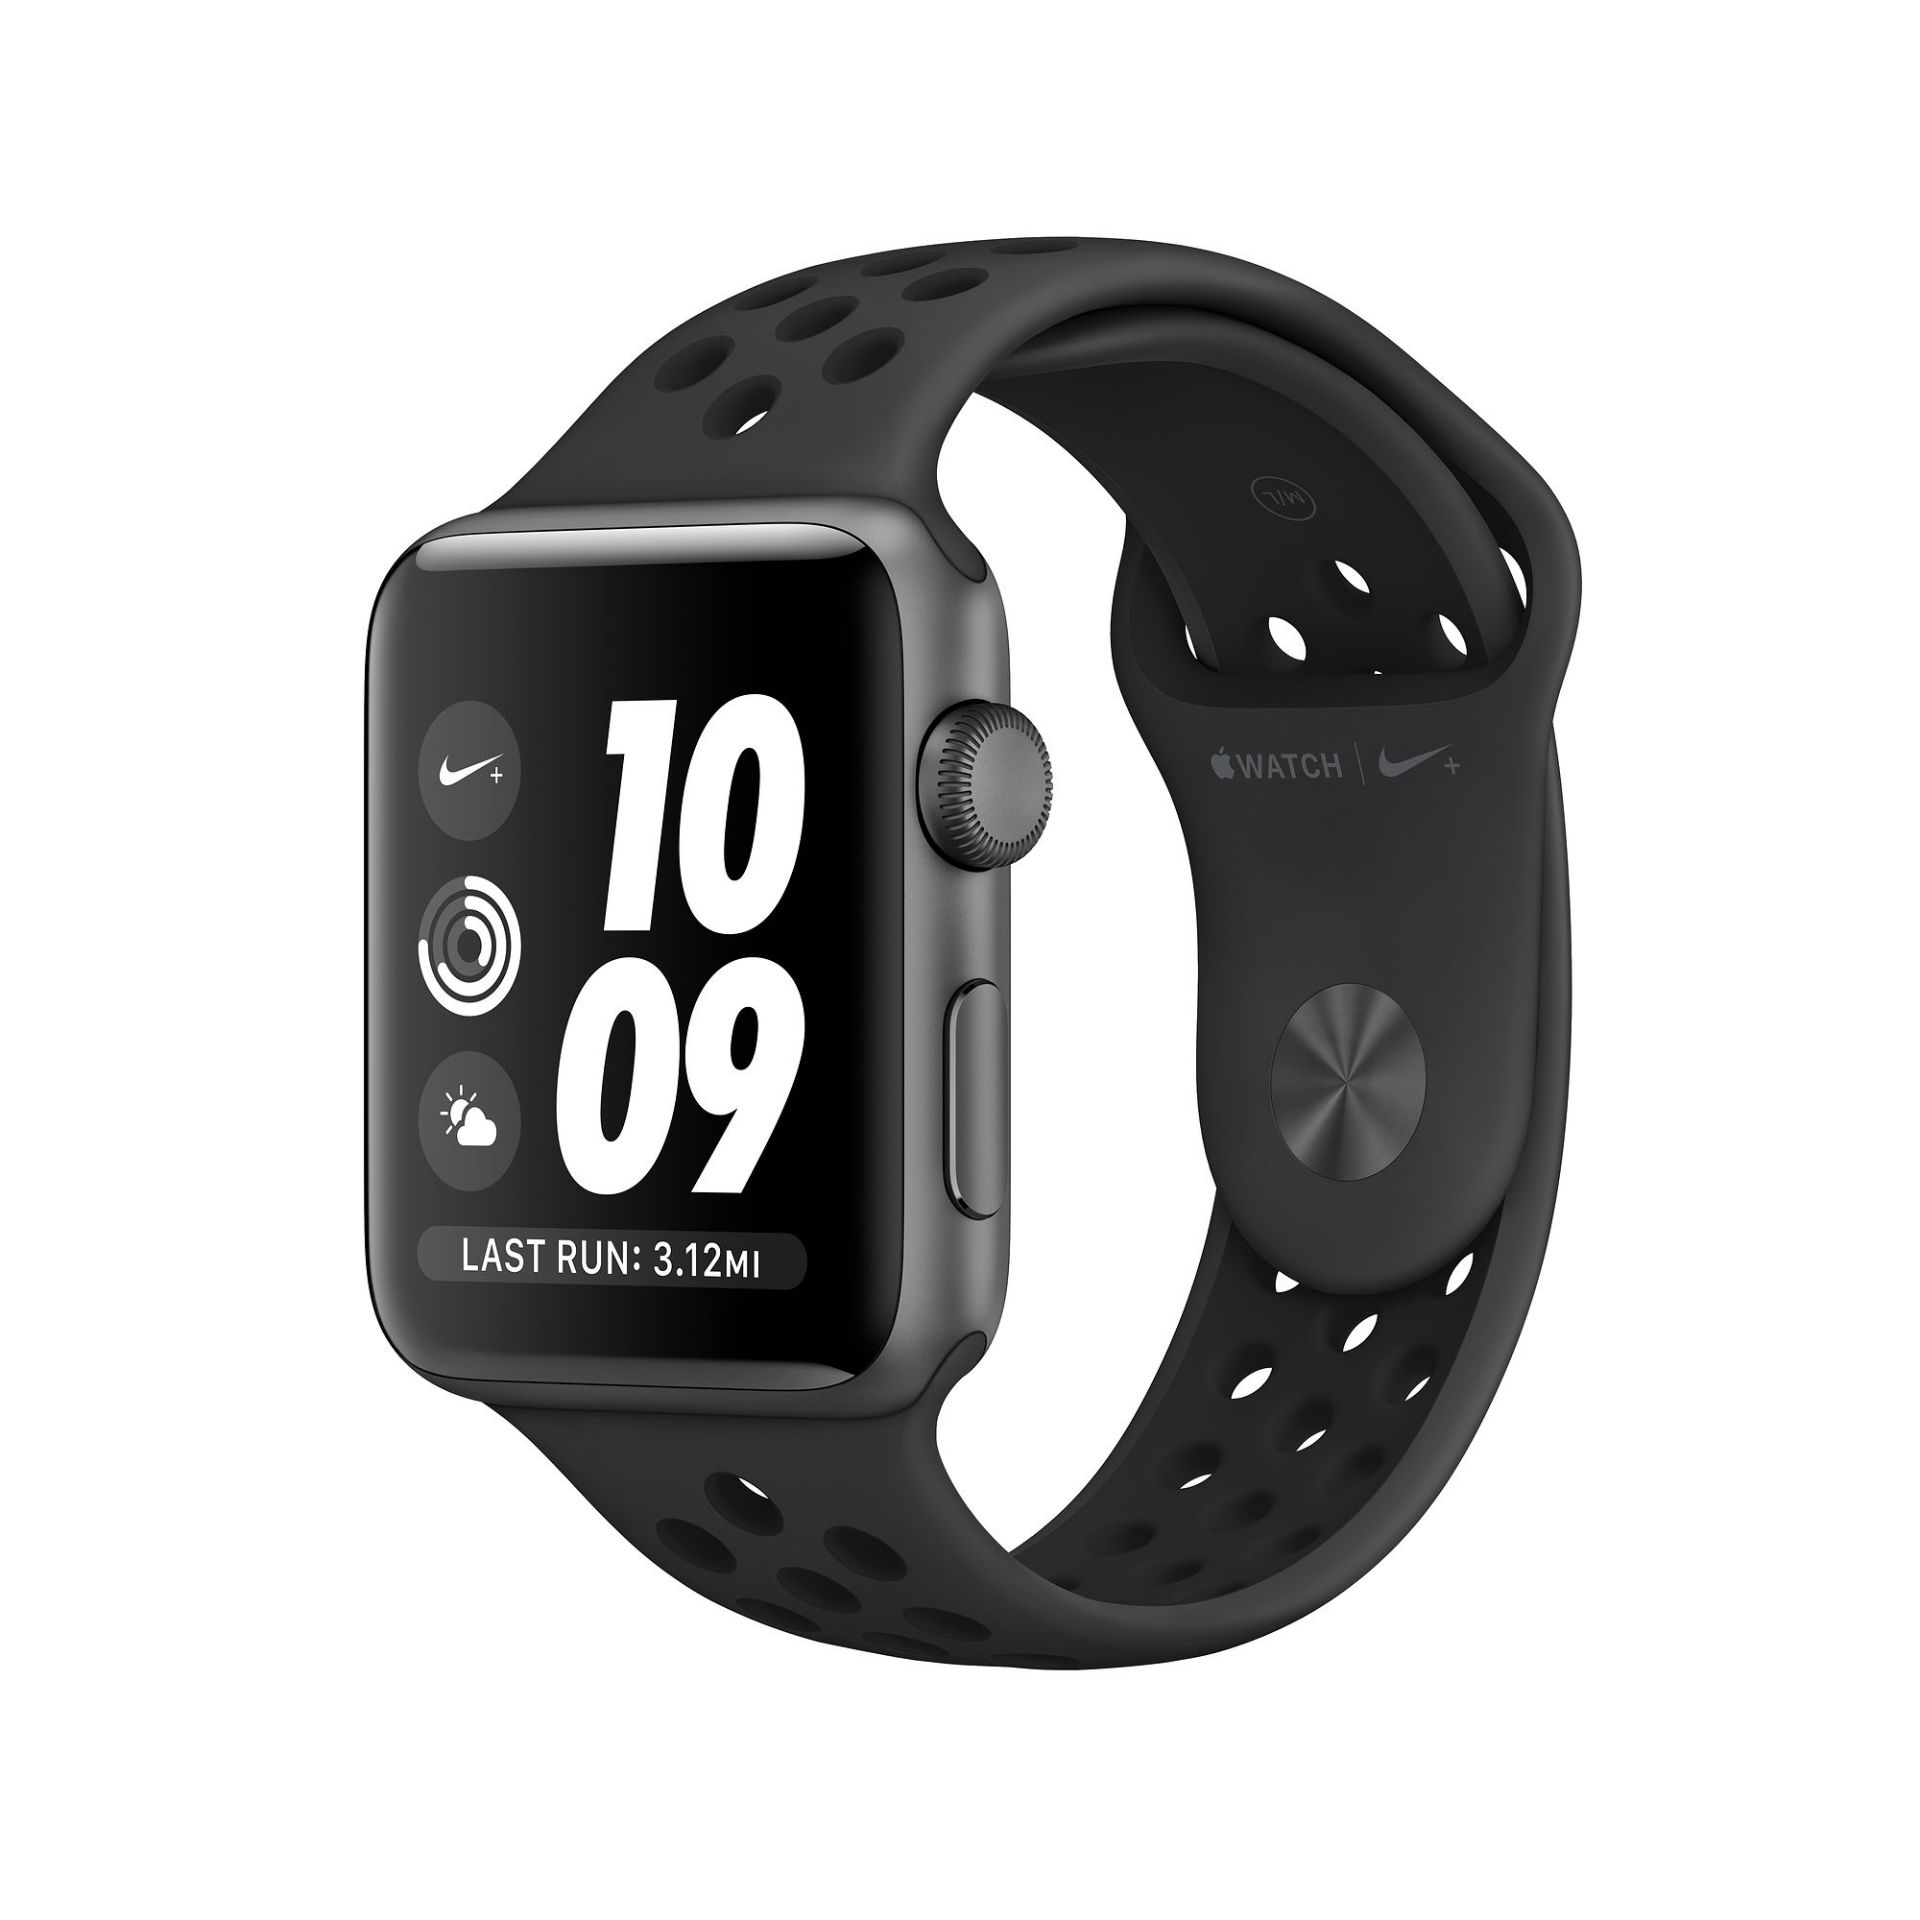 V Grade A Apple Watch Series 3 Space Grey 38mm Nike Edition + Cellular (Includes Genuine Strap & USB